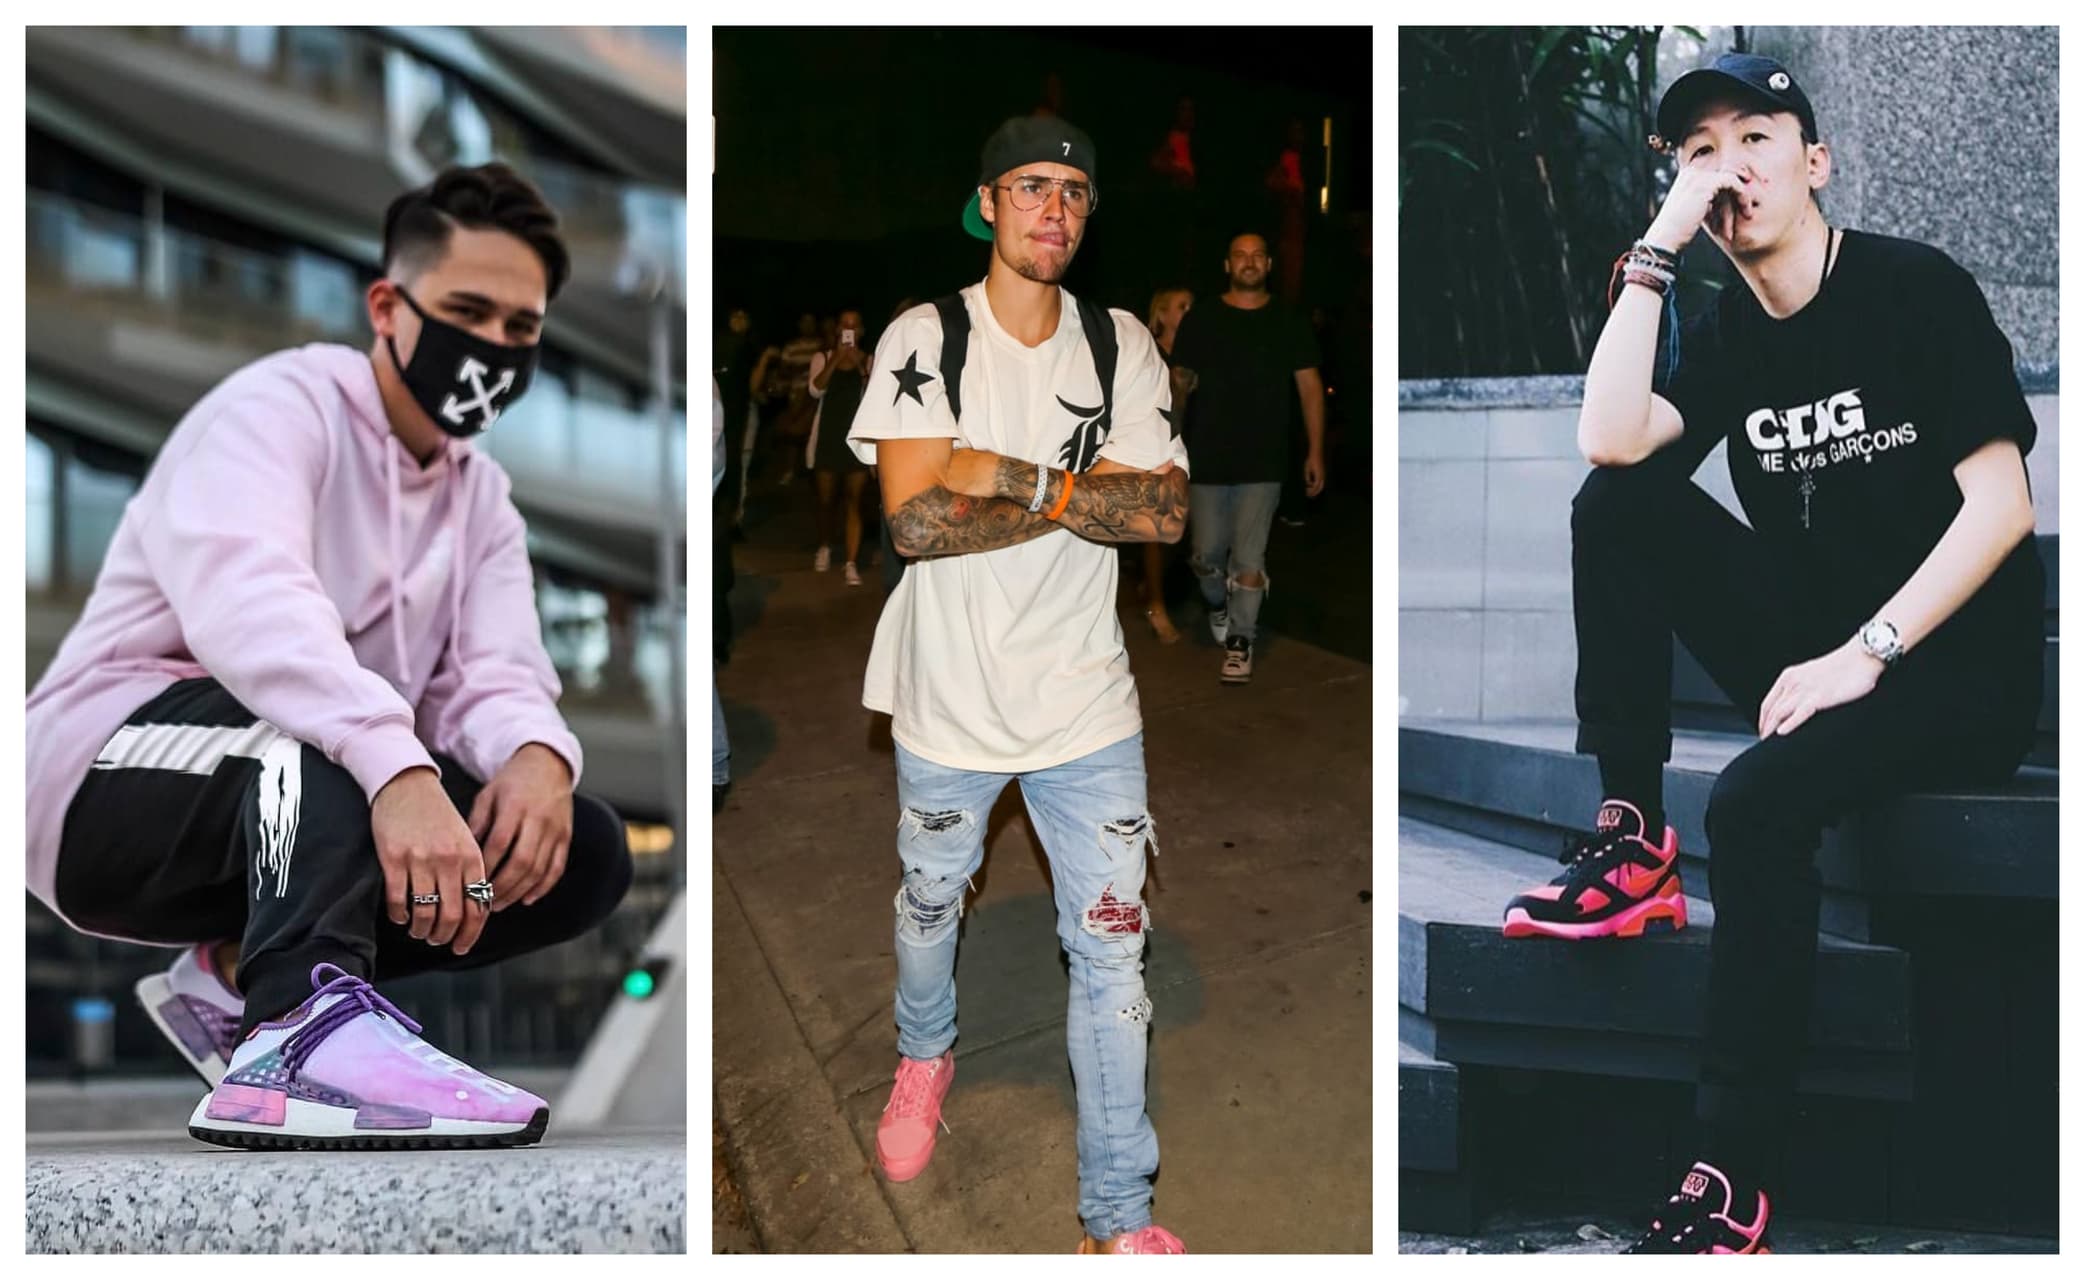 Spring-Summer 2019, why do you guys wear pink shoes to be manly?